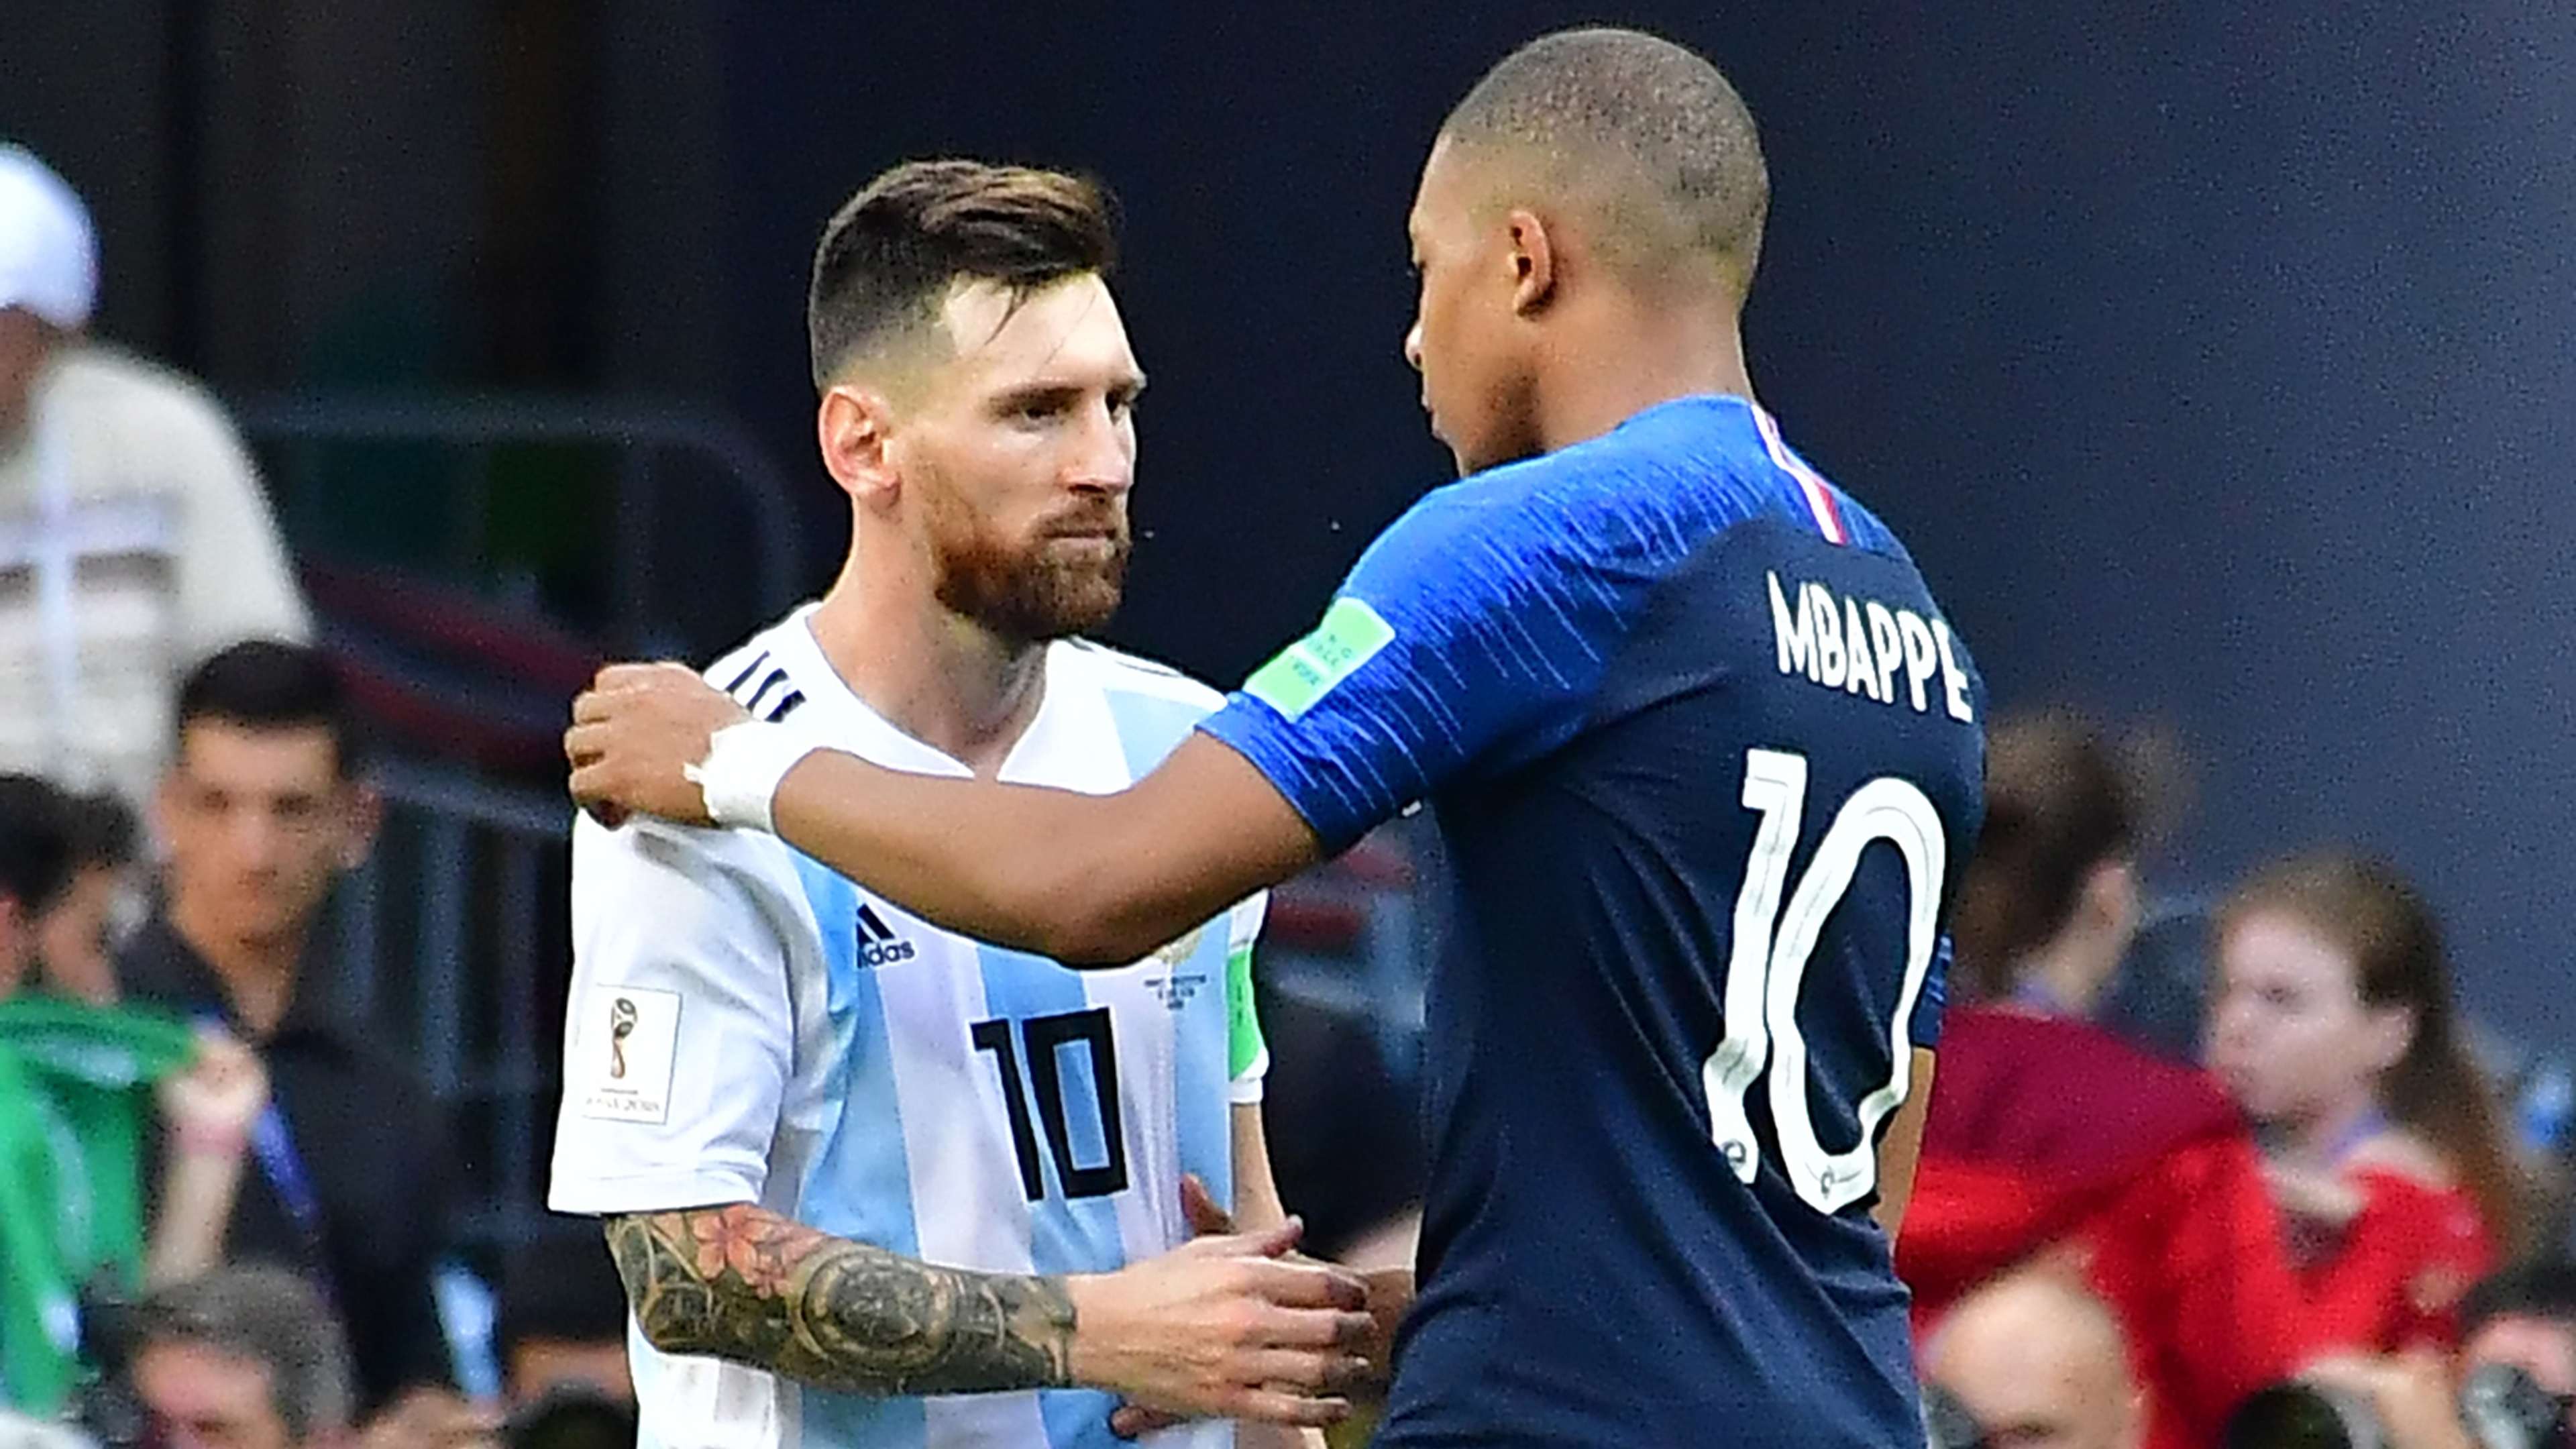 Lionel Messi Kylian Mbappe World Cup 2018